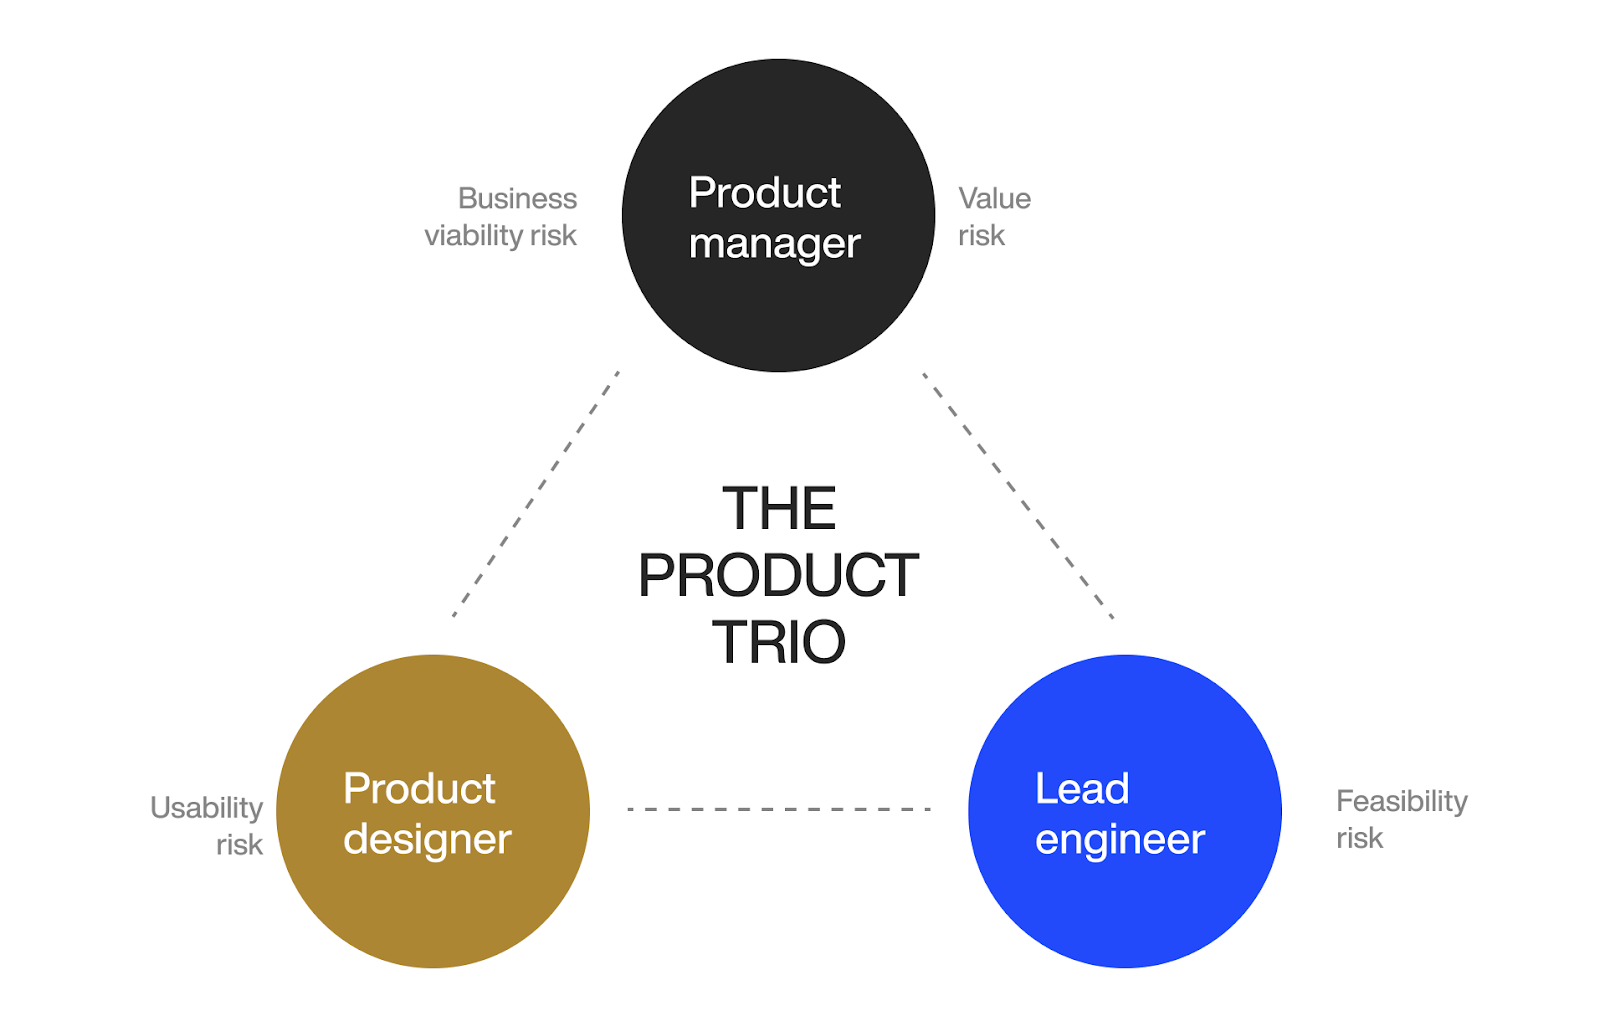 The product trio